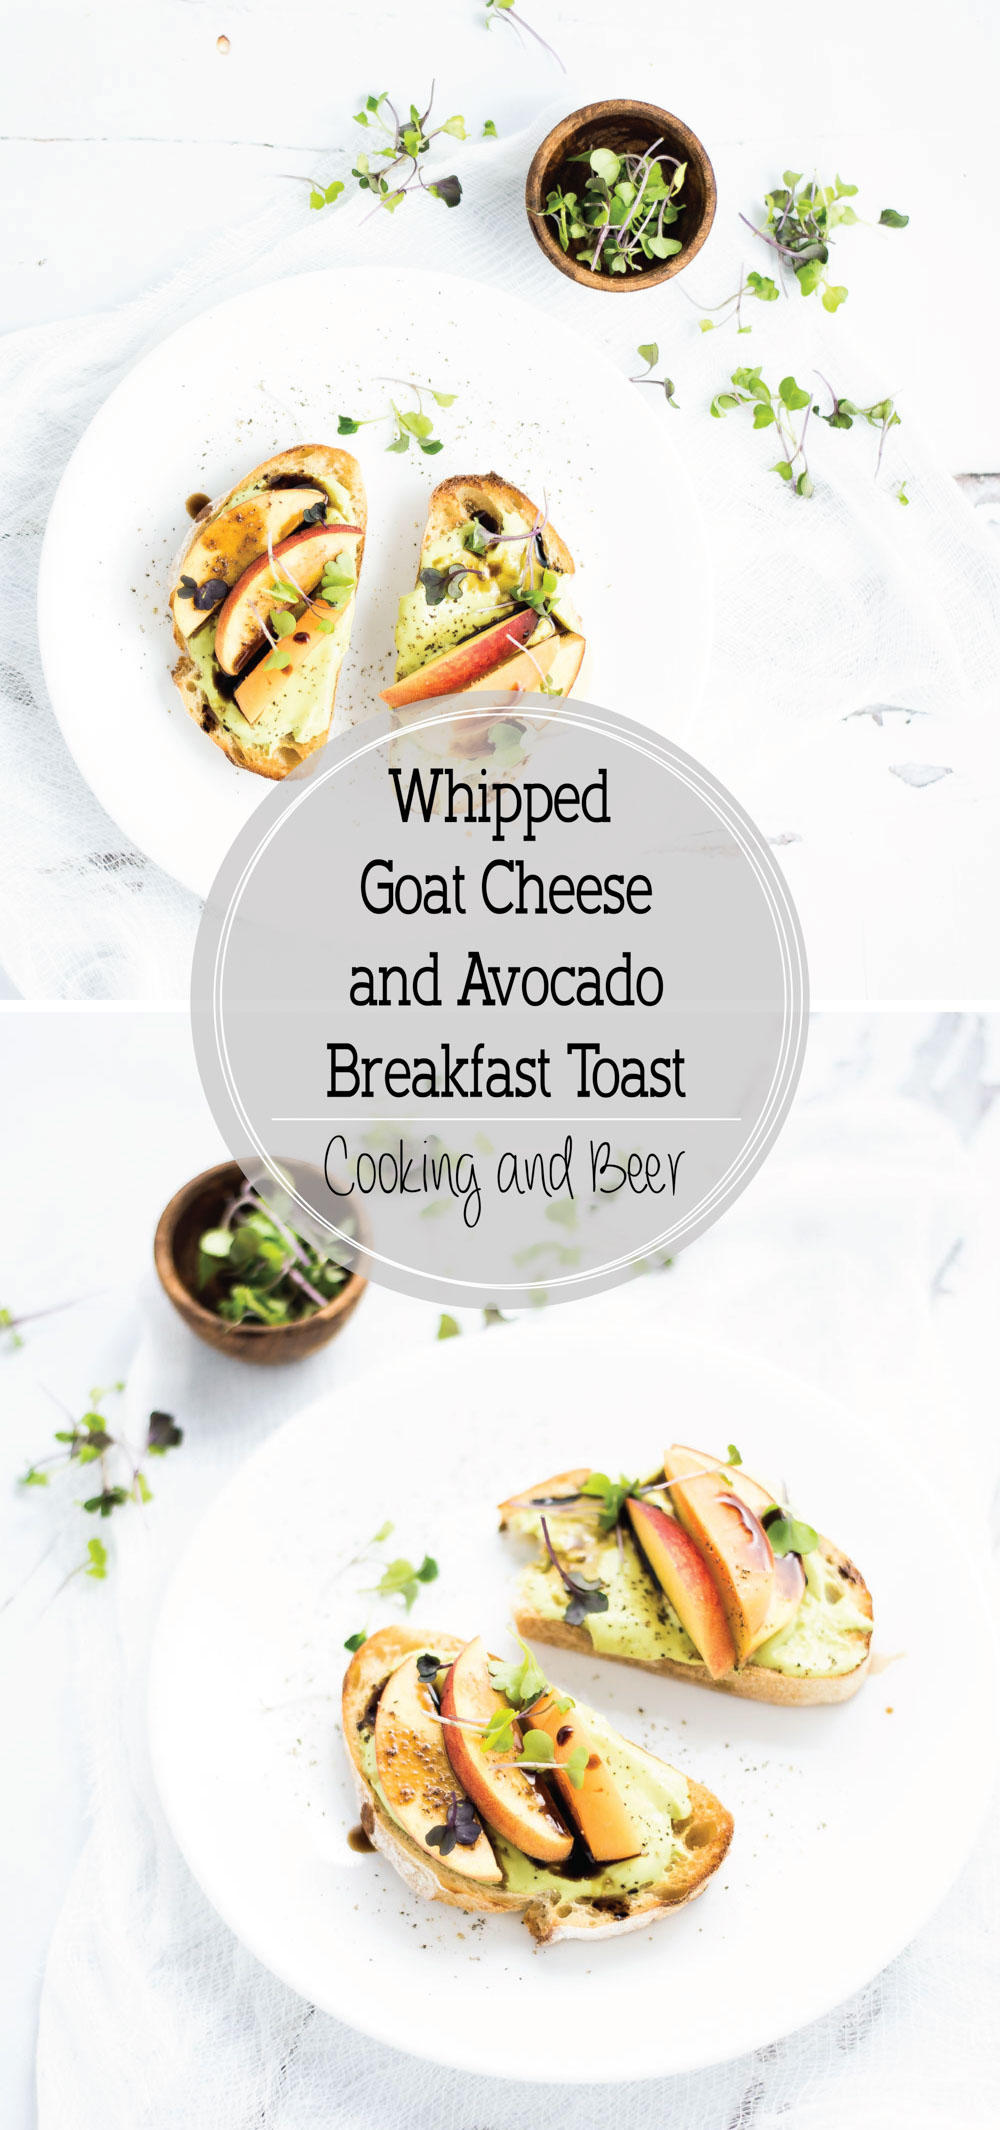 Whipped Goat Cheese and Avocado Breakfast Toast is the perfect way to start the day!